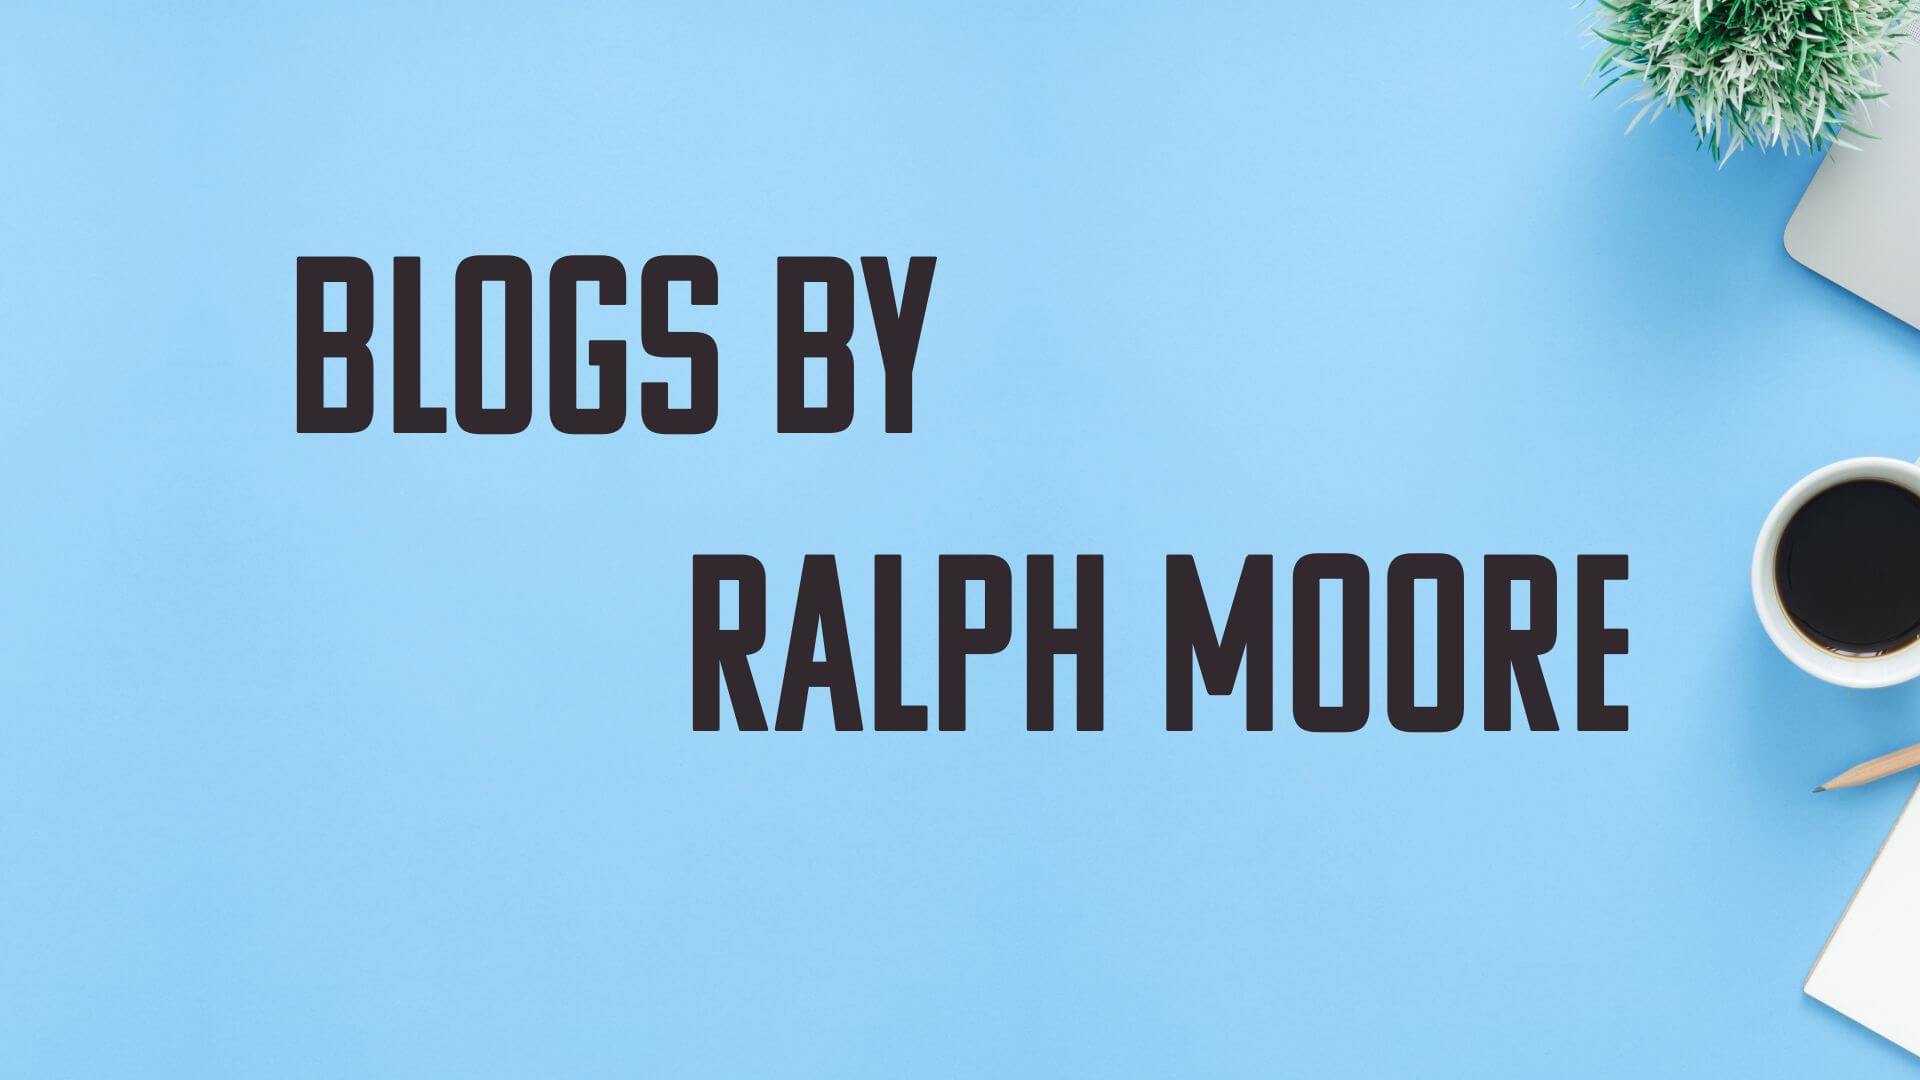 Blogs by Ralph Moore